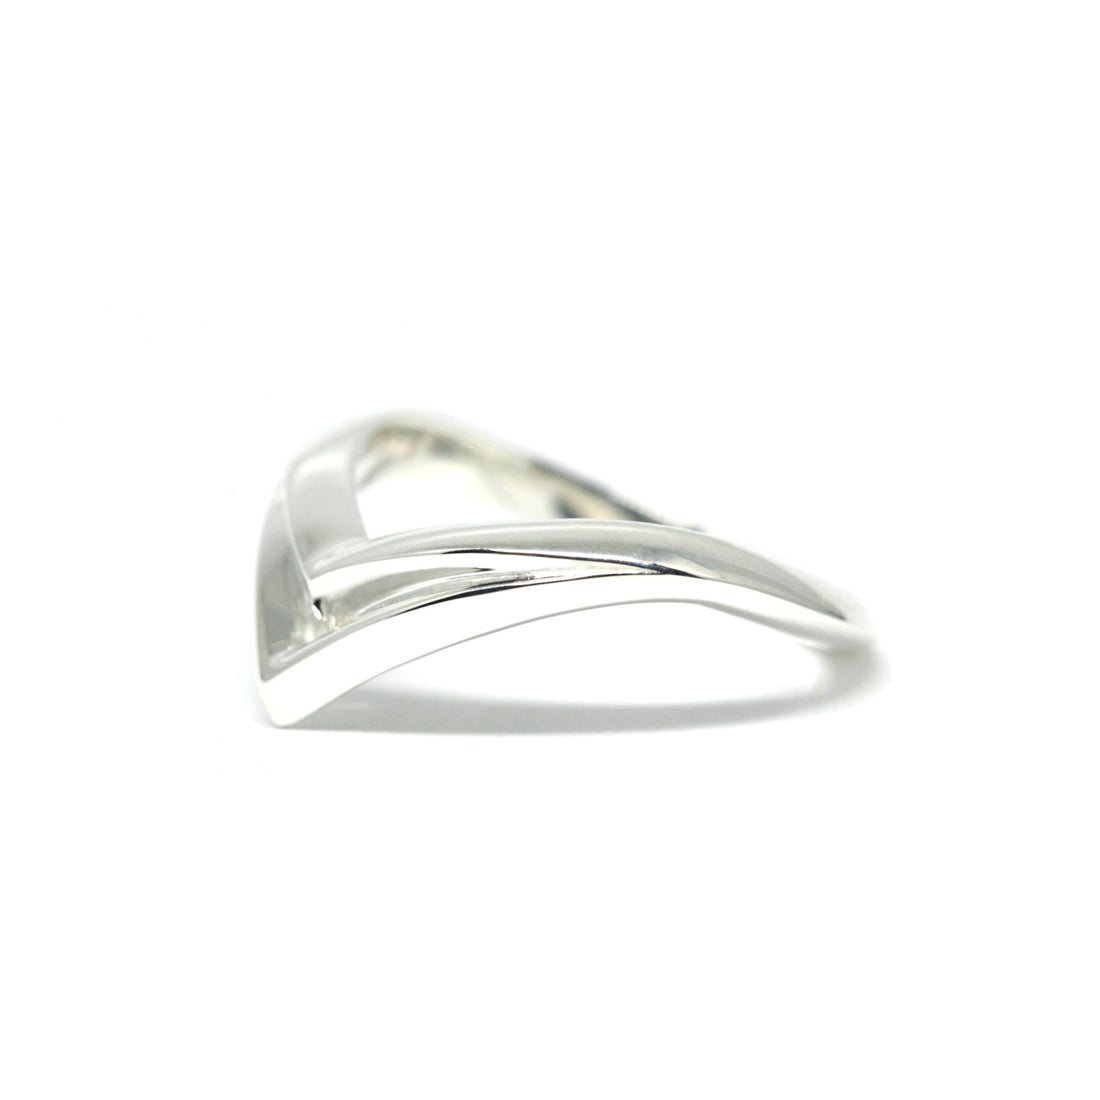 bena jewelry adron ring silver cocktail ring custom handmade fine jewelry montreal made in canada modern jewelry designer minimalist shape and edgy jewels montreal little italy jeweler